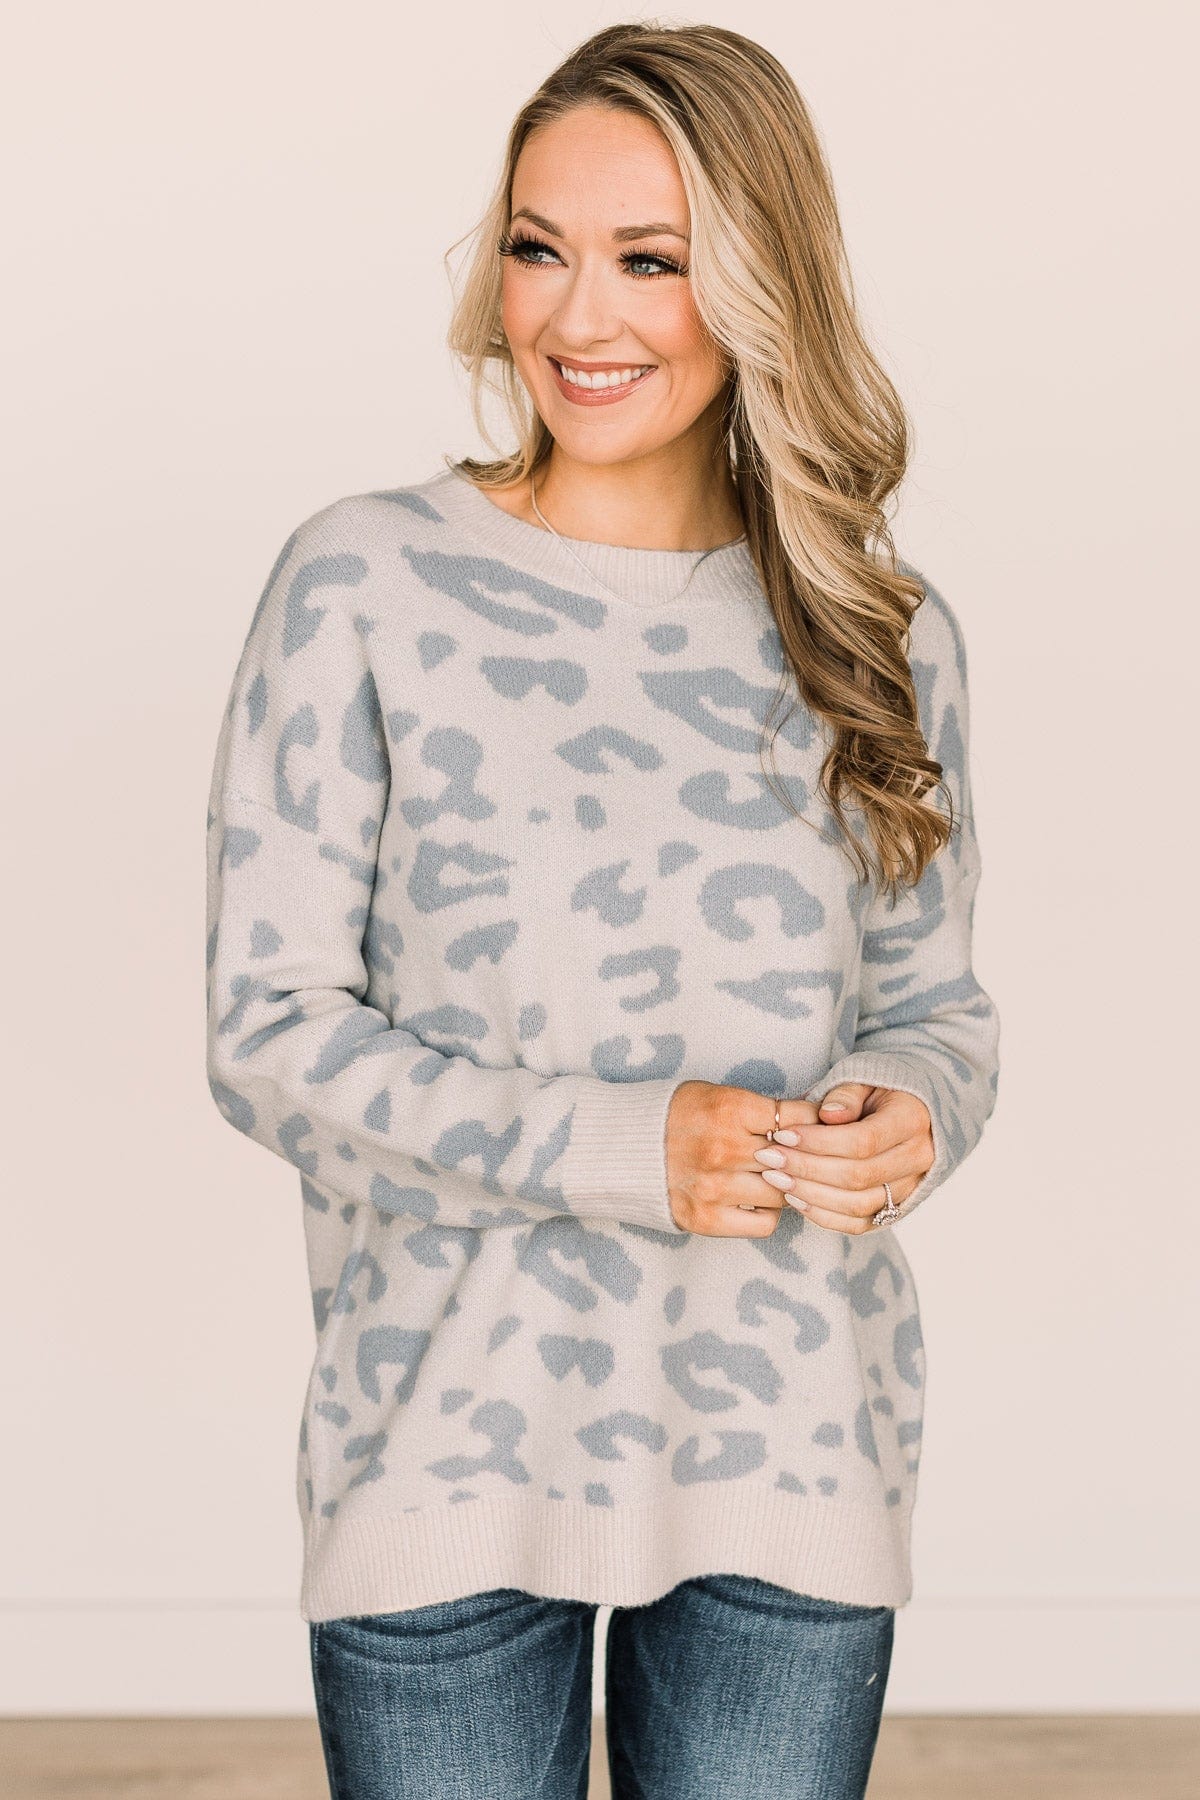 One Last Kiss Leopard Sweater- Ivory & Dusty Blue – The Pulse Boutique